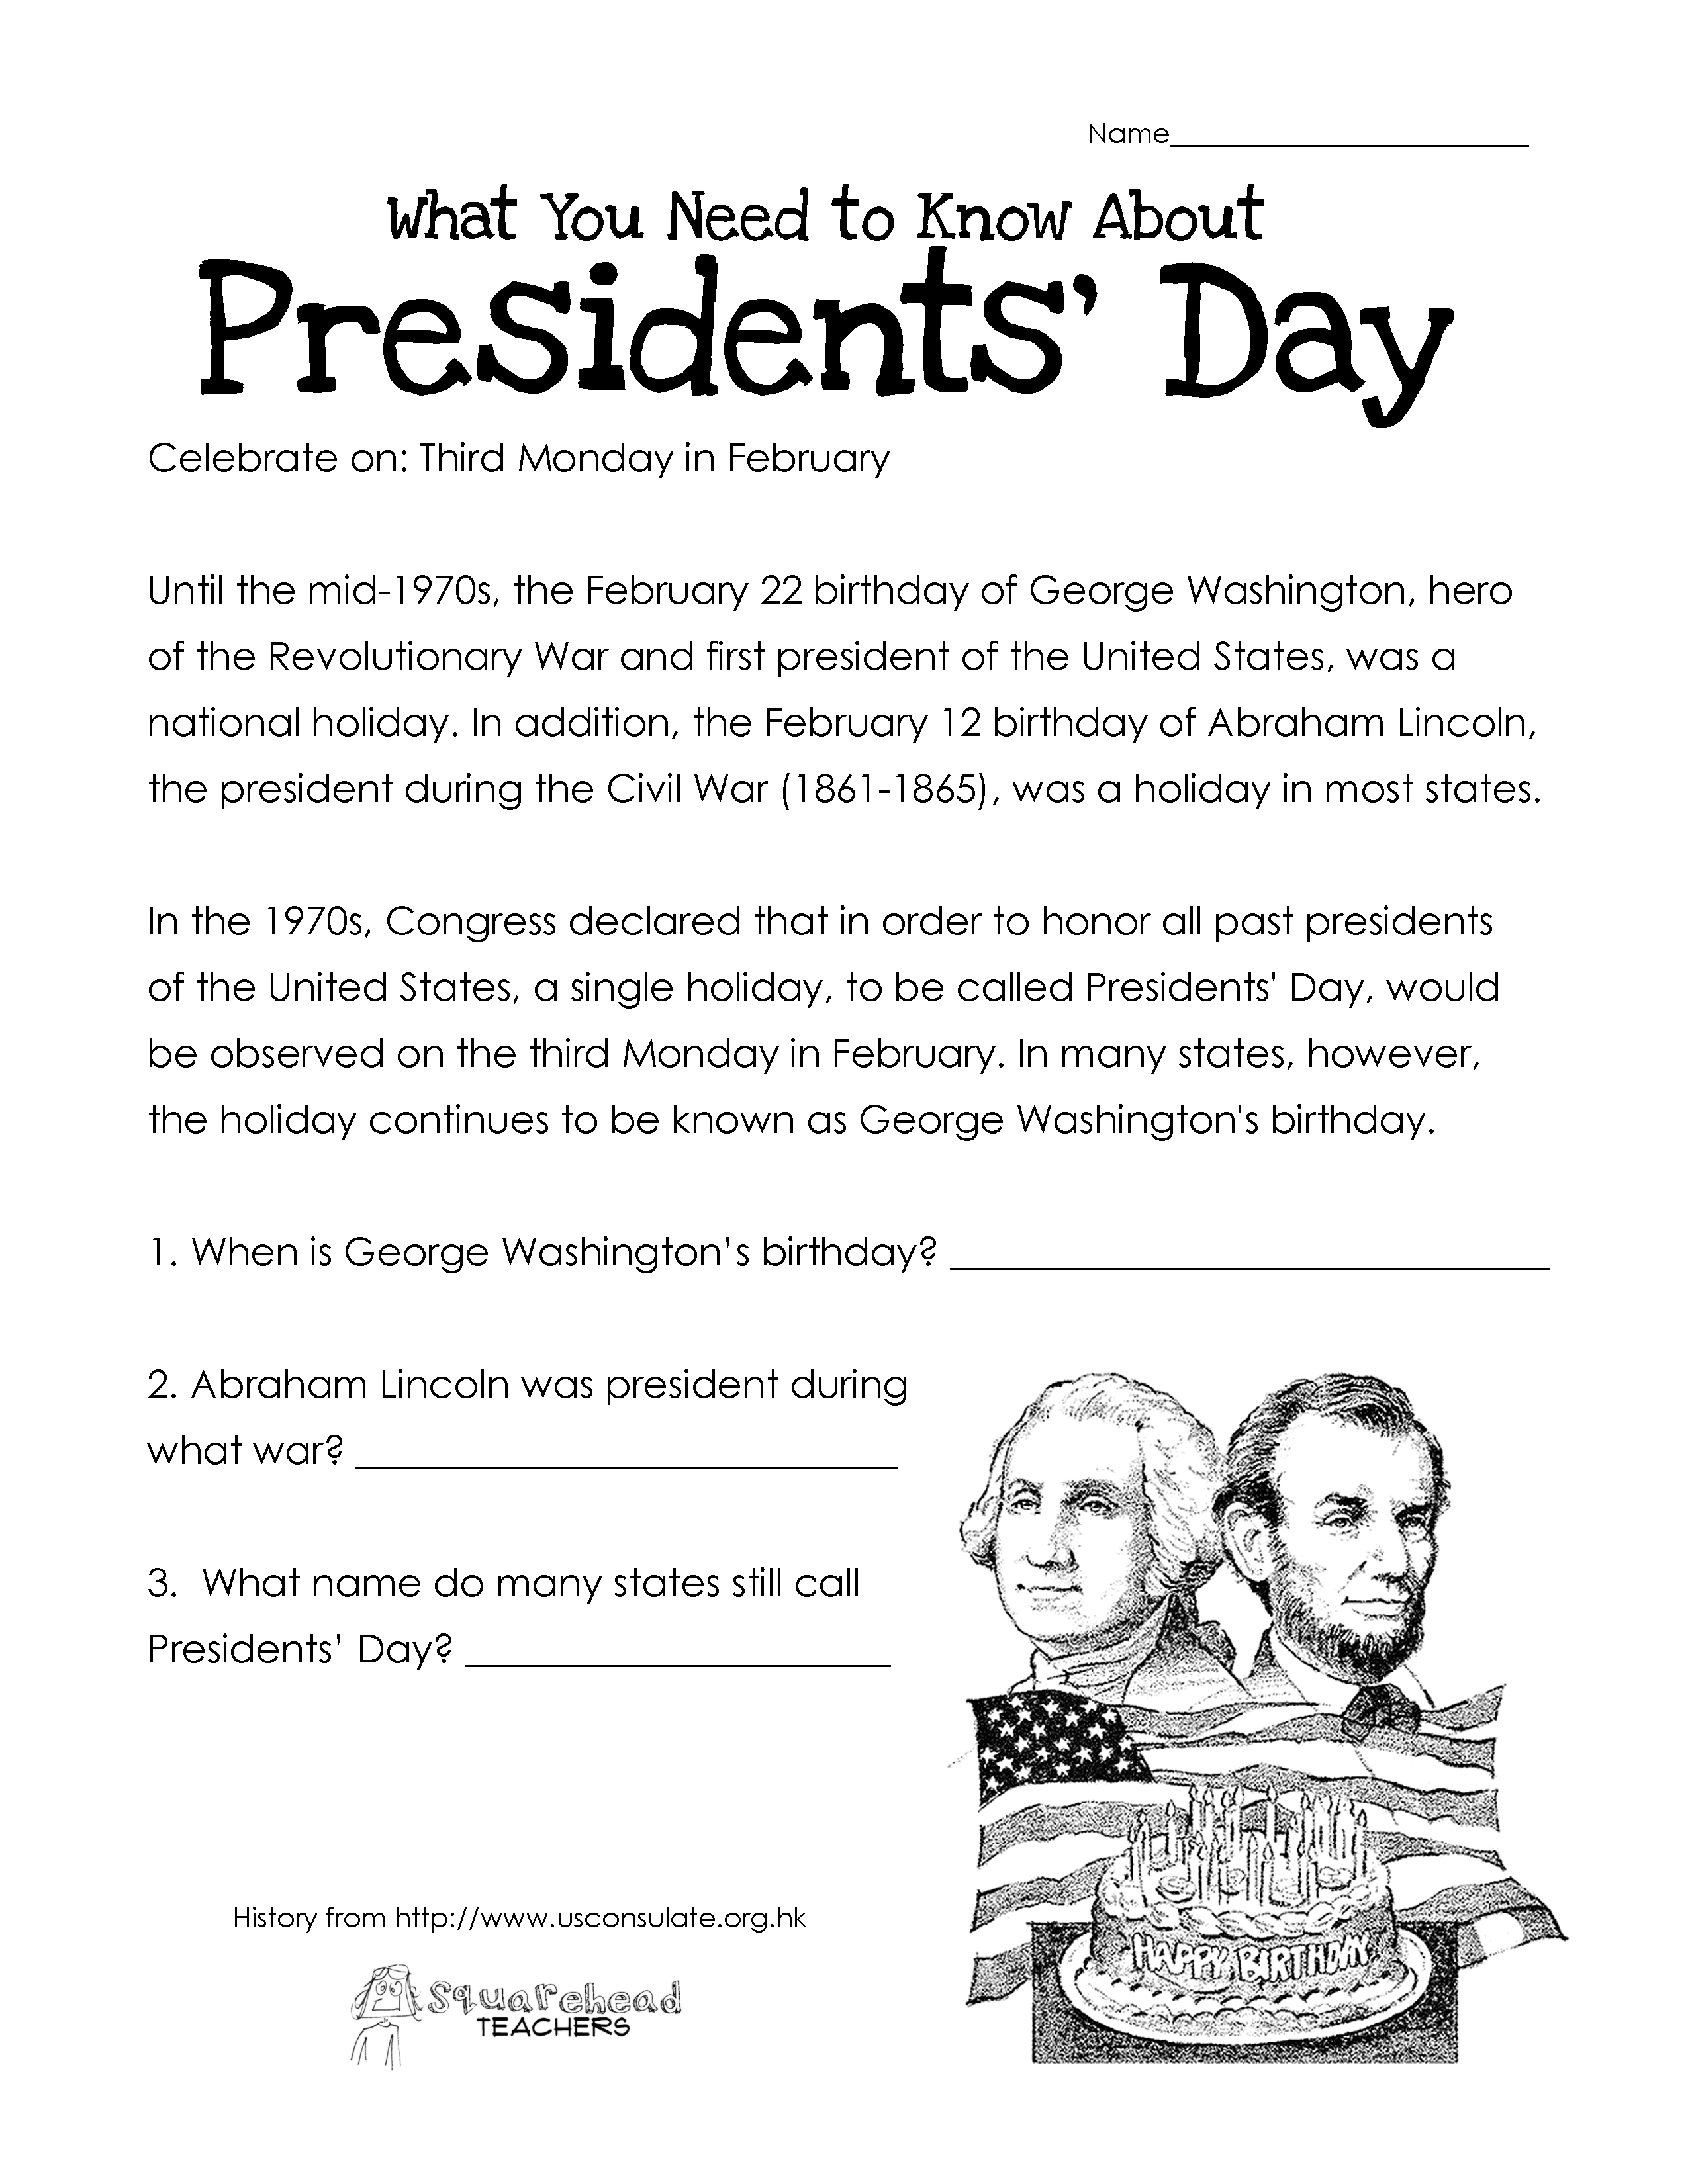 happy-presidents-day-template-postermywall